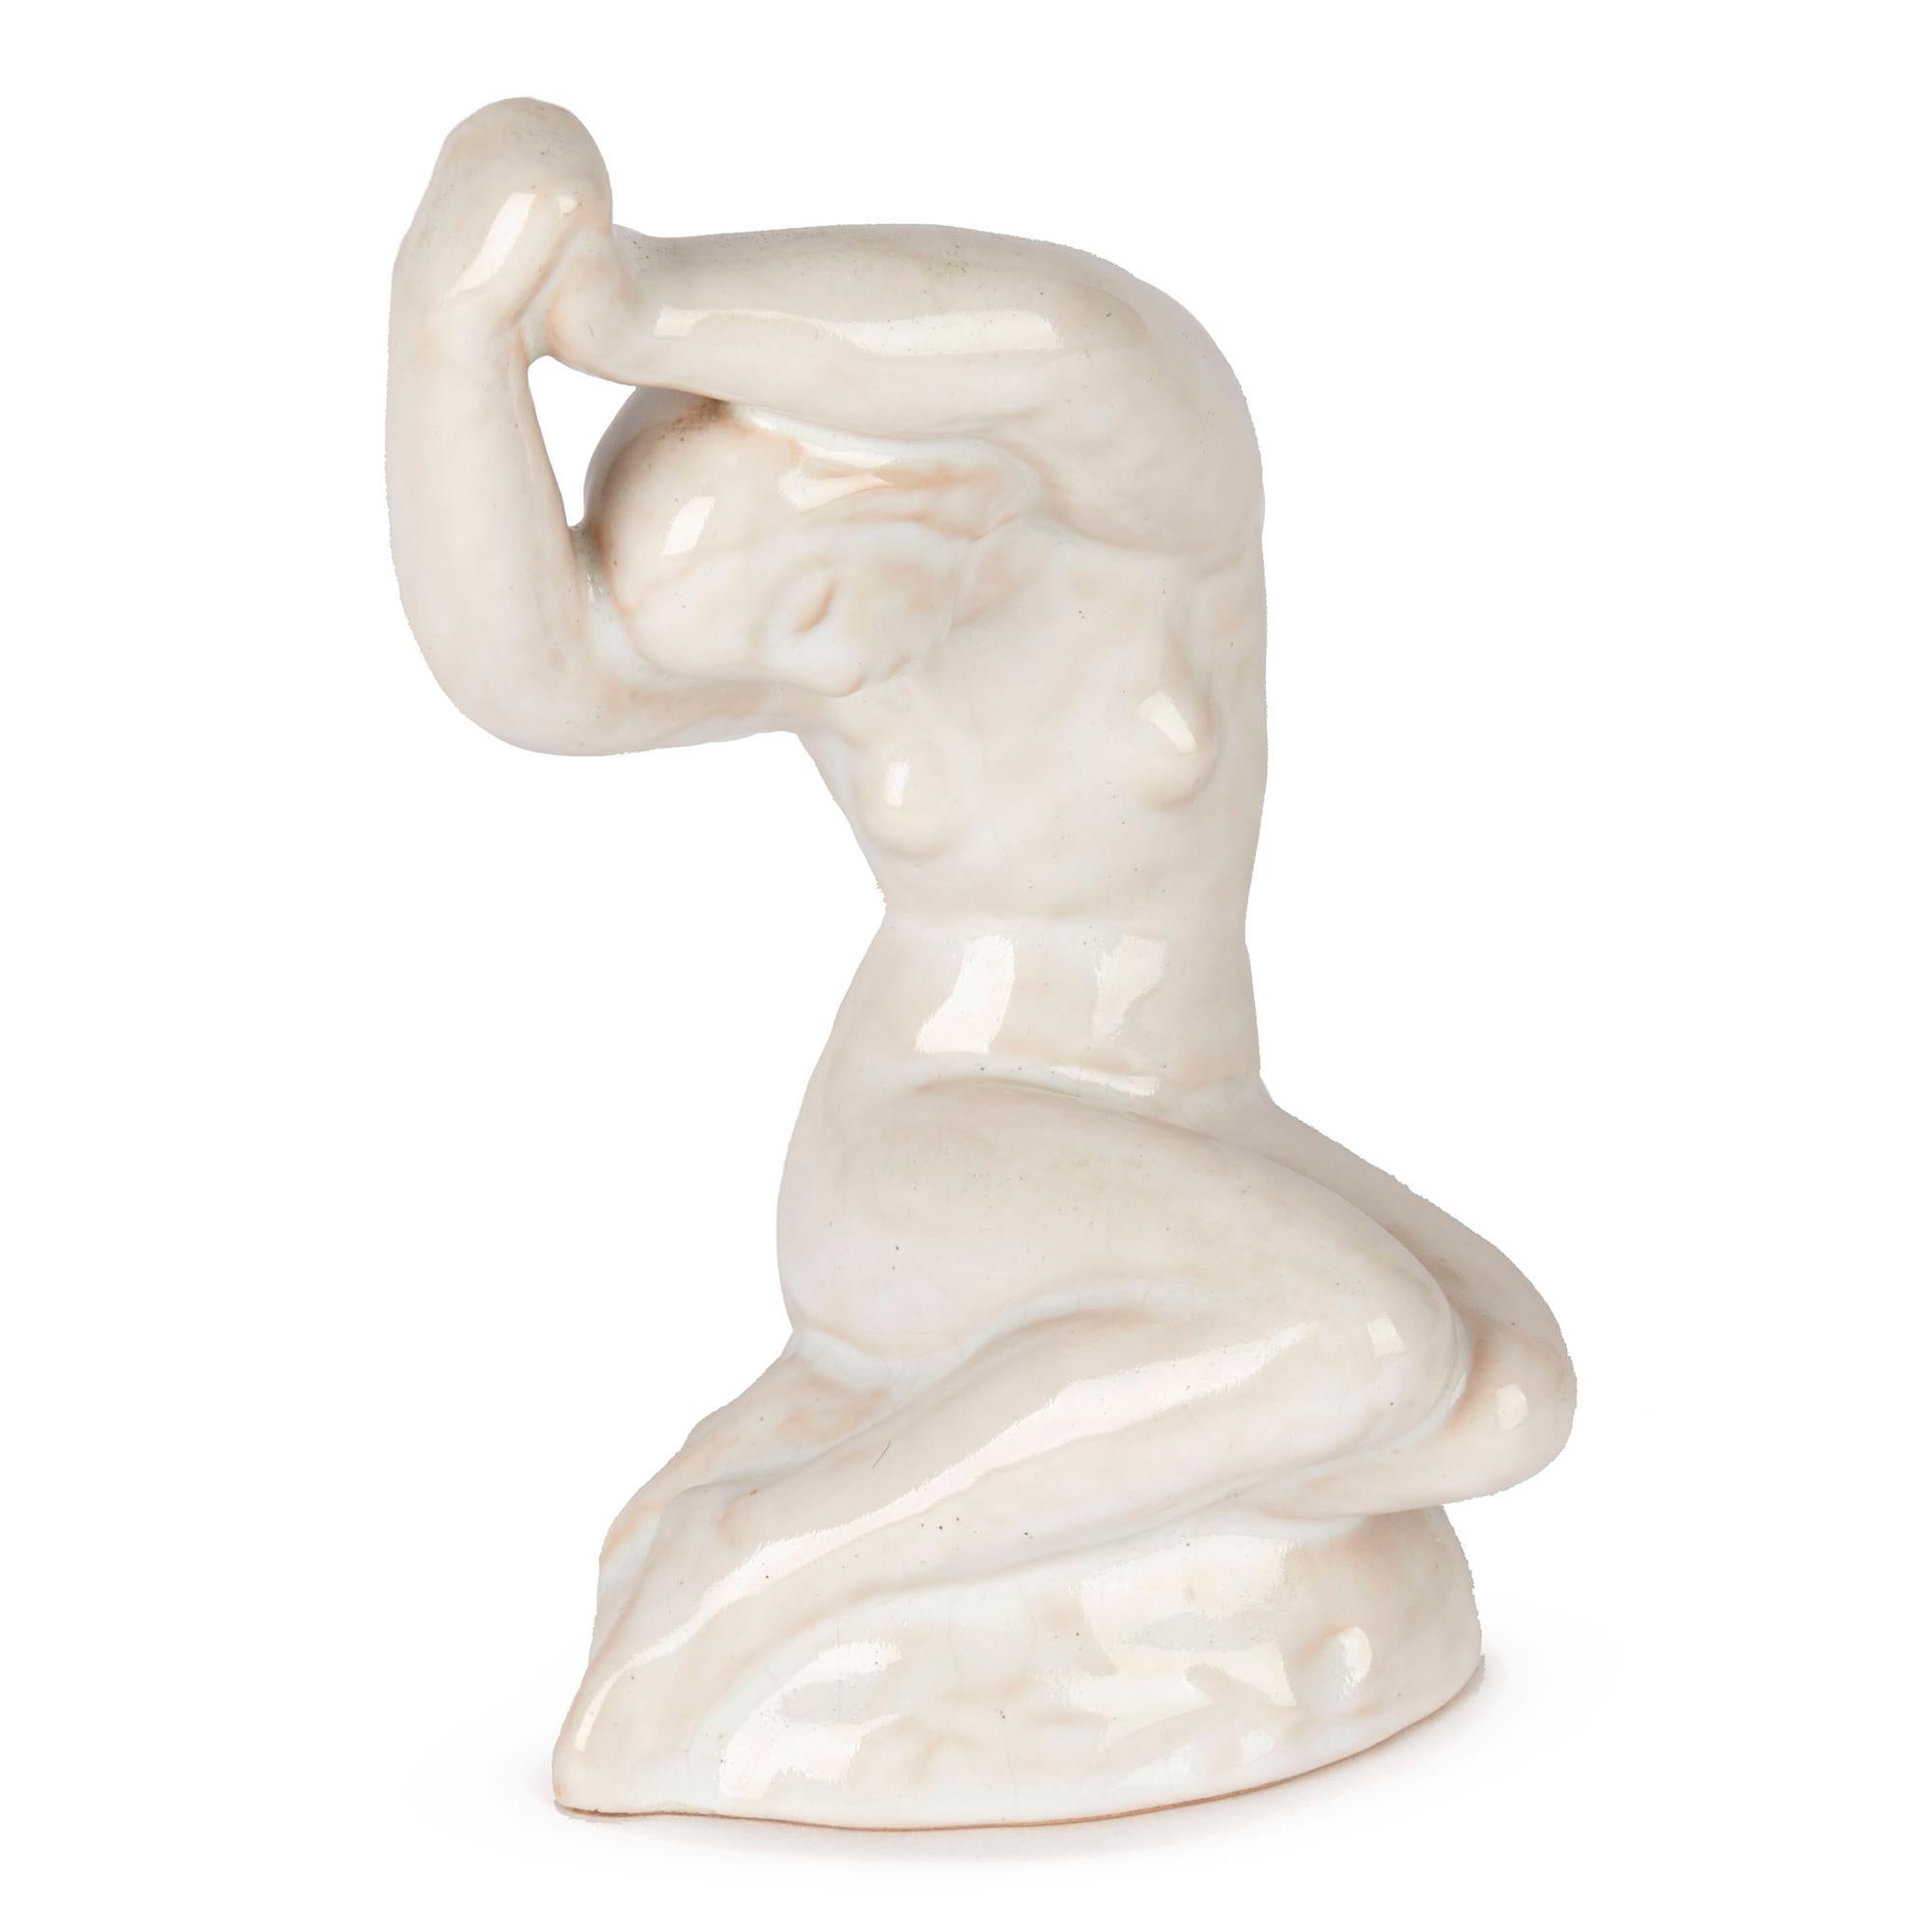 Glazed Lauritz Adolph Hjorth Danish Midcentury Pottery Seated Nude Figurine For Sale